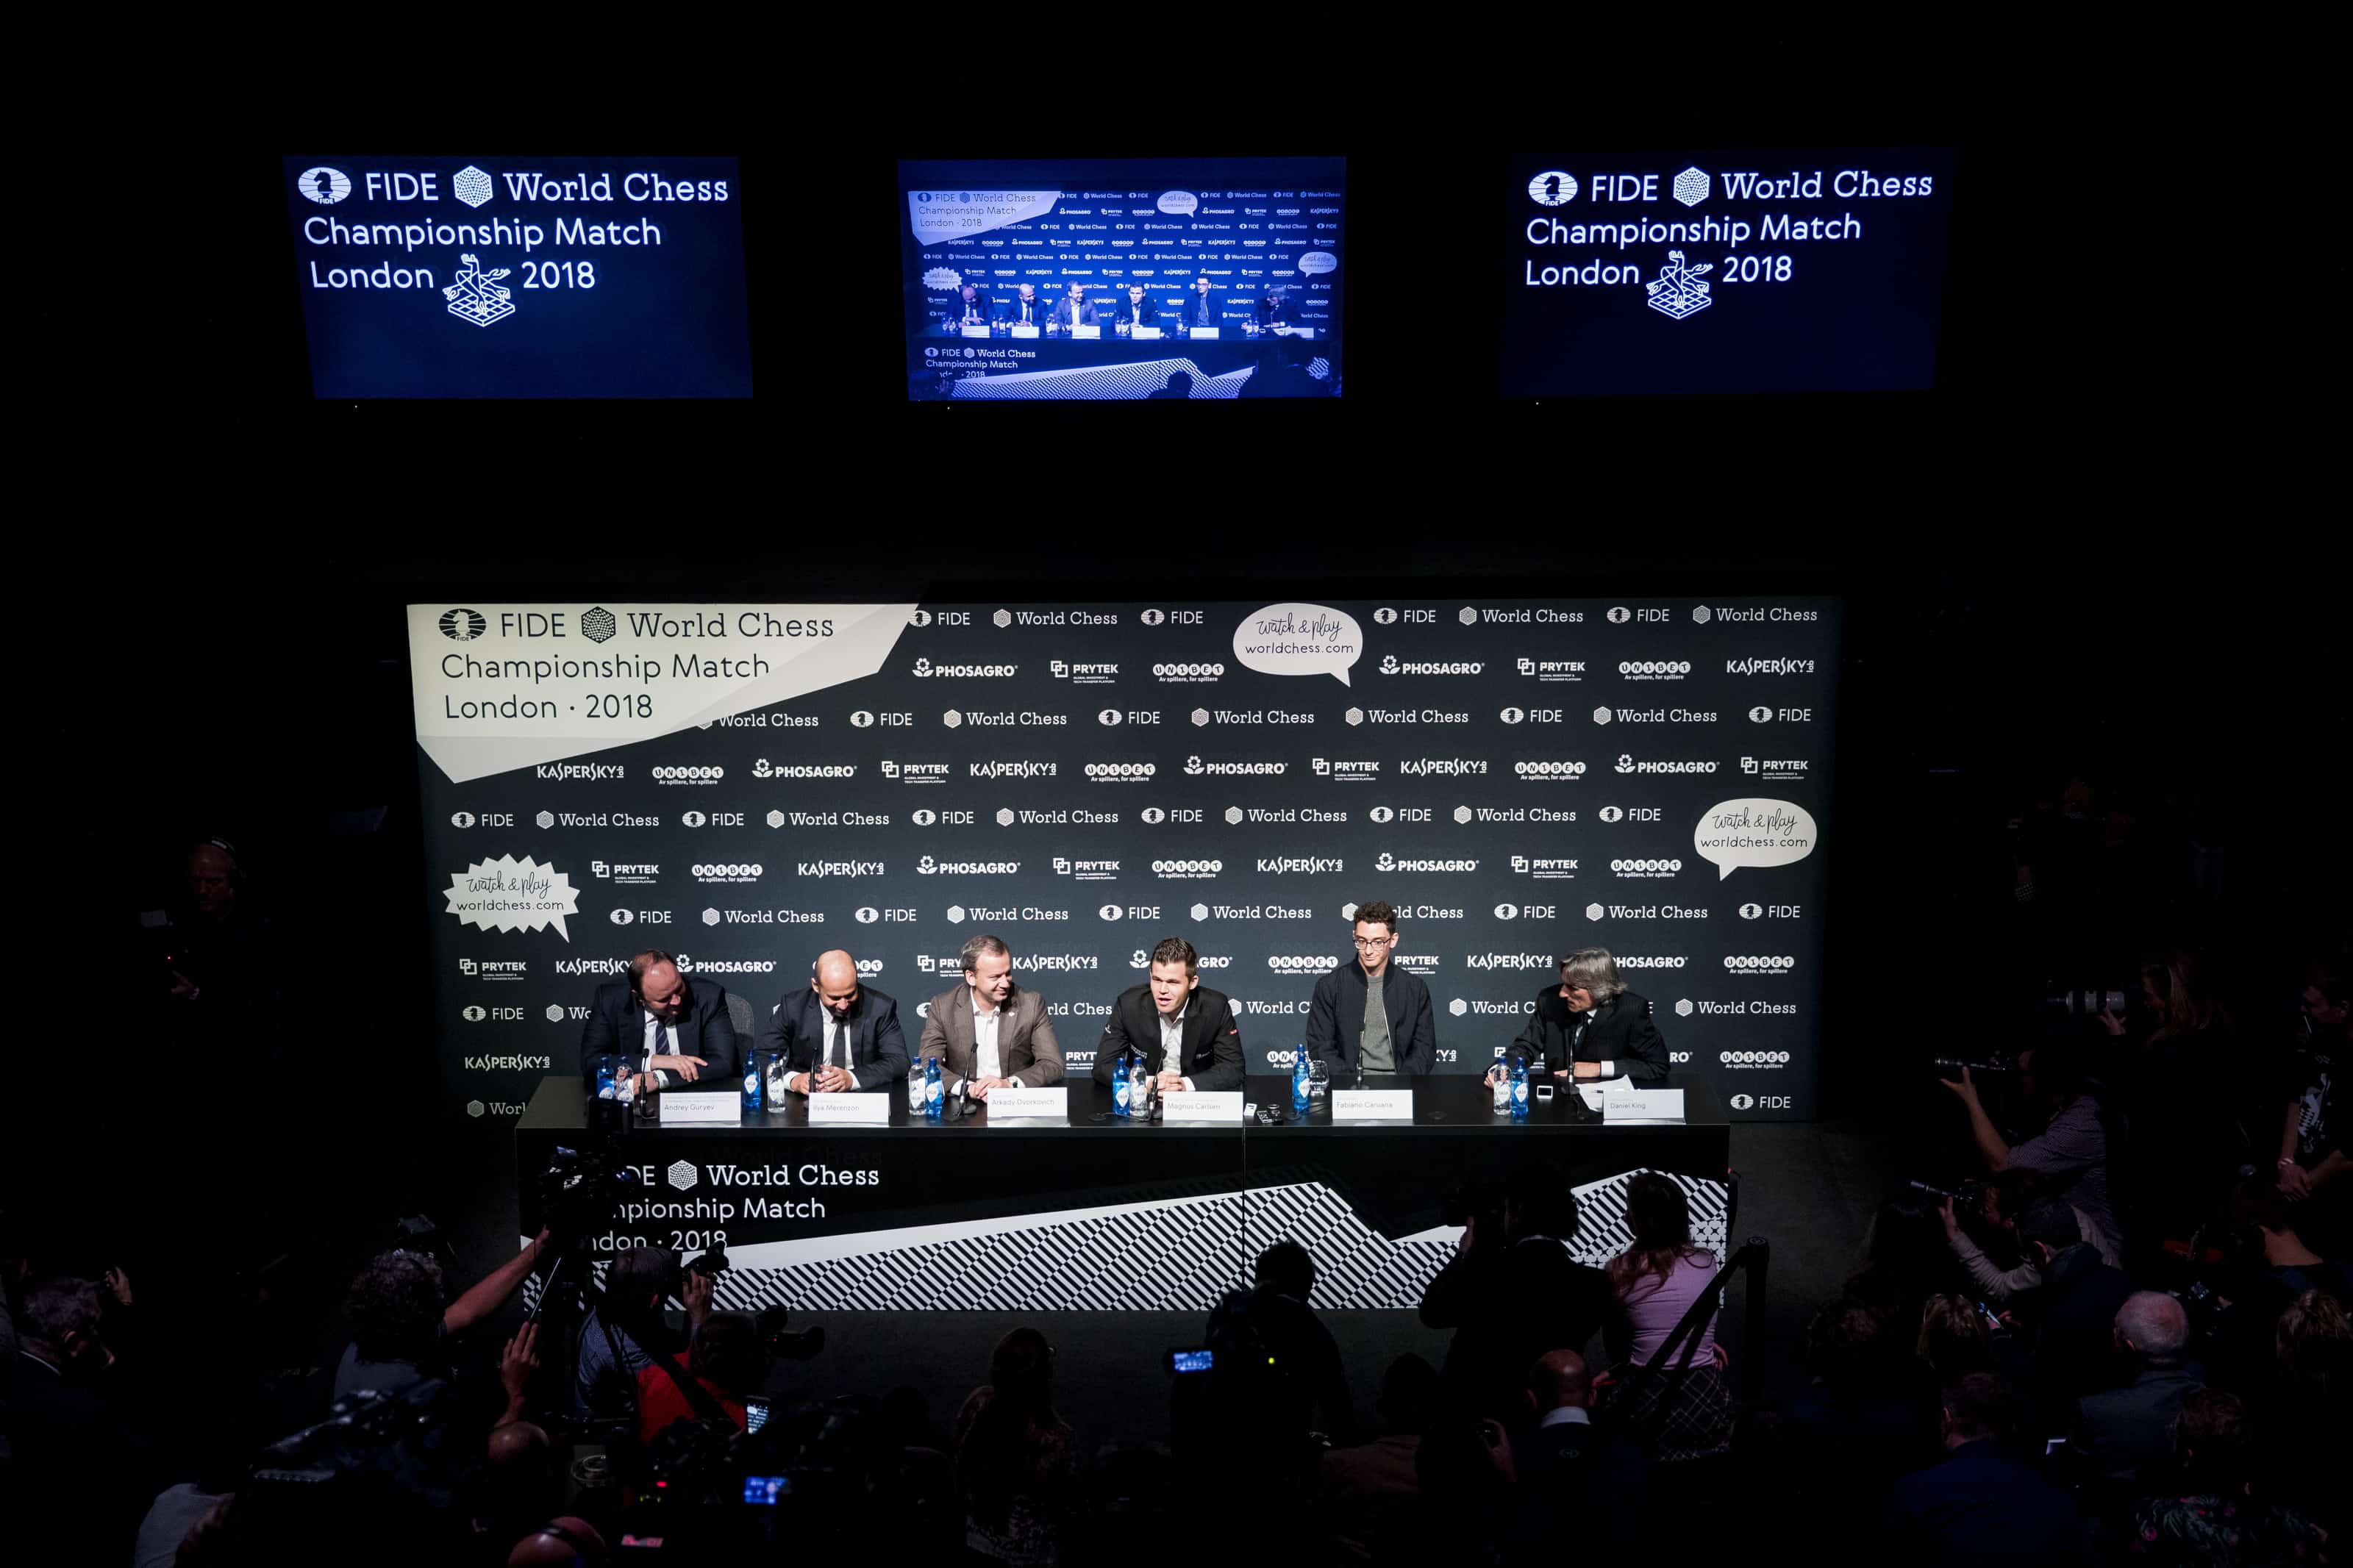 The World Chess Championship line-up